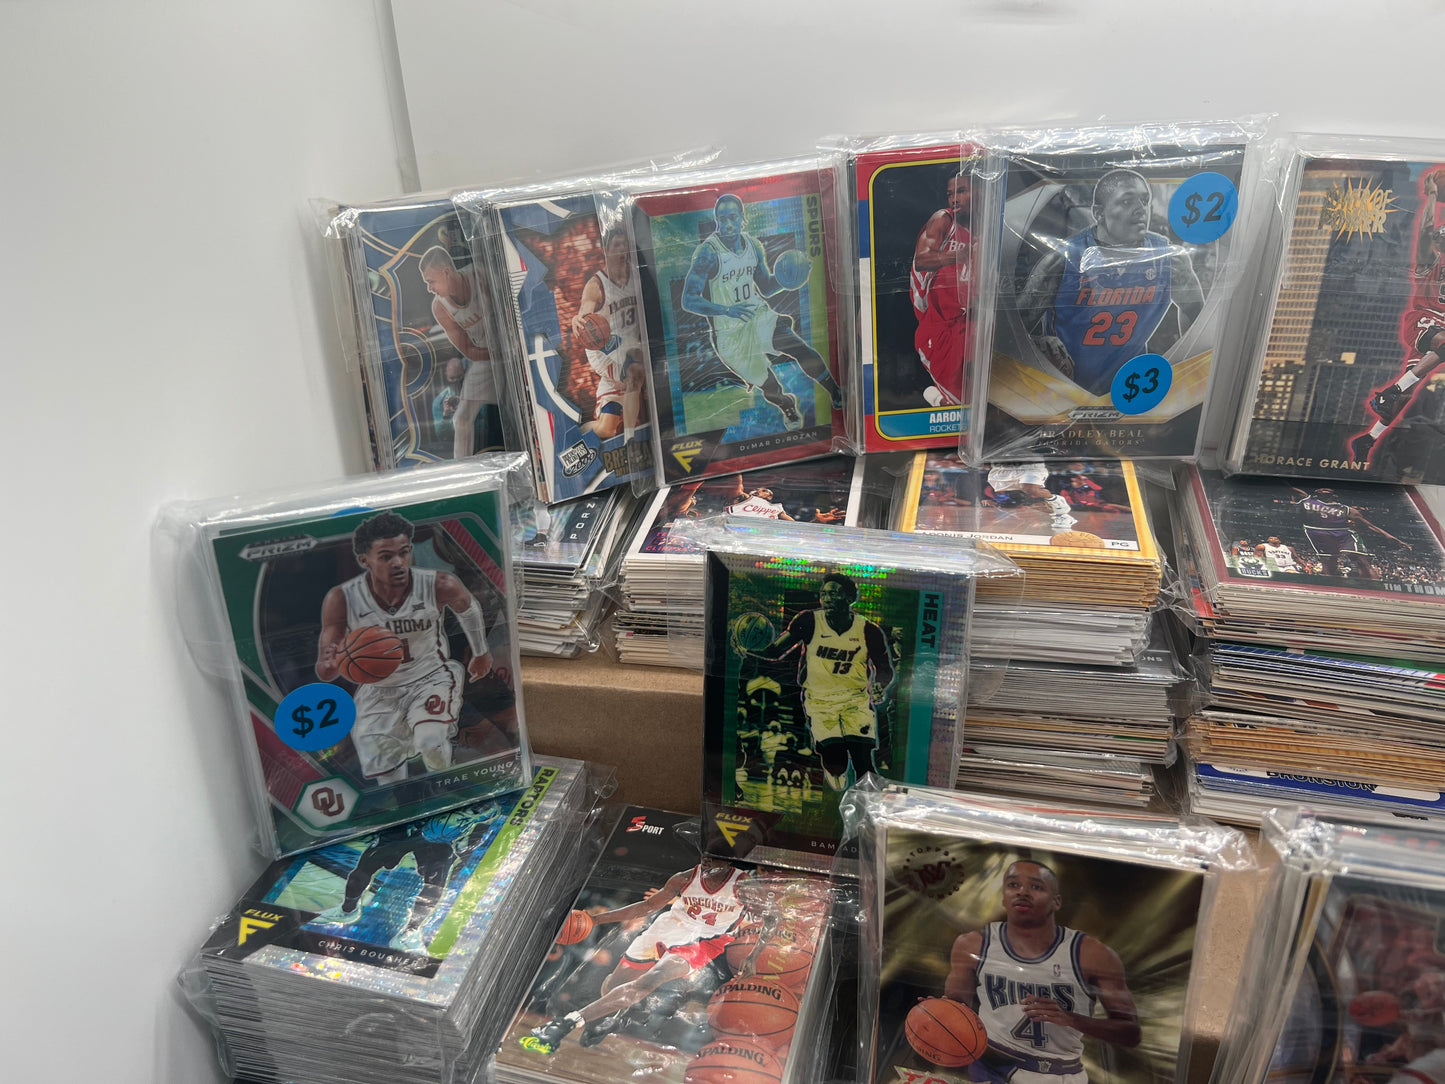 1989-1990's, 2000's, 2010-2020's Vintage to Current NBA Basketball 1600 Plus Card Lot Collection